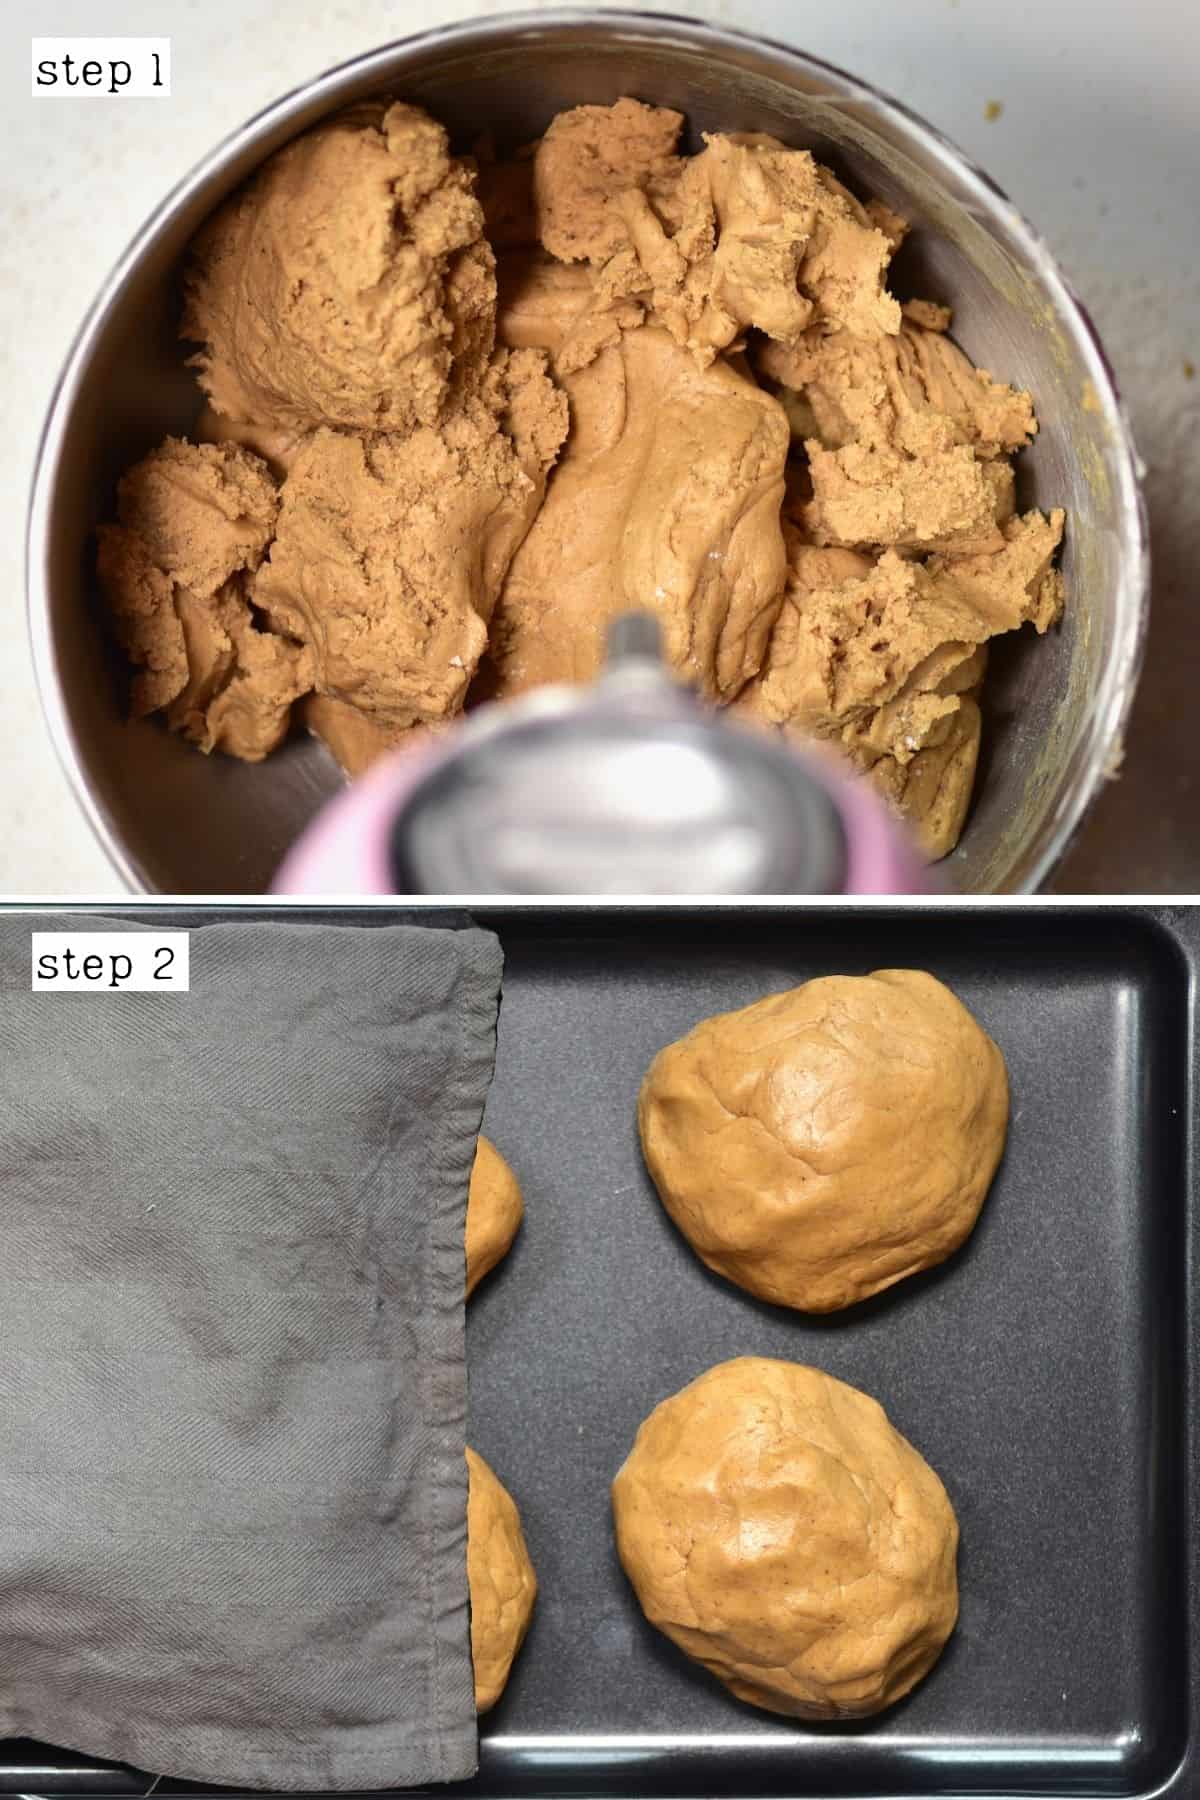 https://www.alphafoodie.com/wp-content/uploads/2022/11/Gingerbread-House-Steps-for-preparing-dough-for-gingerbread-house.jpeg